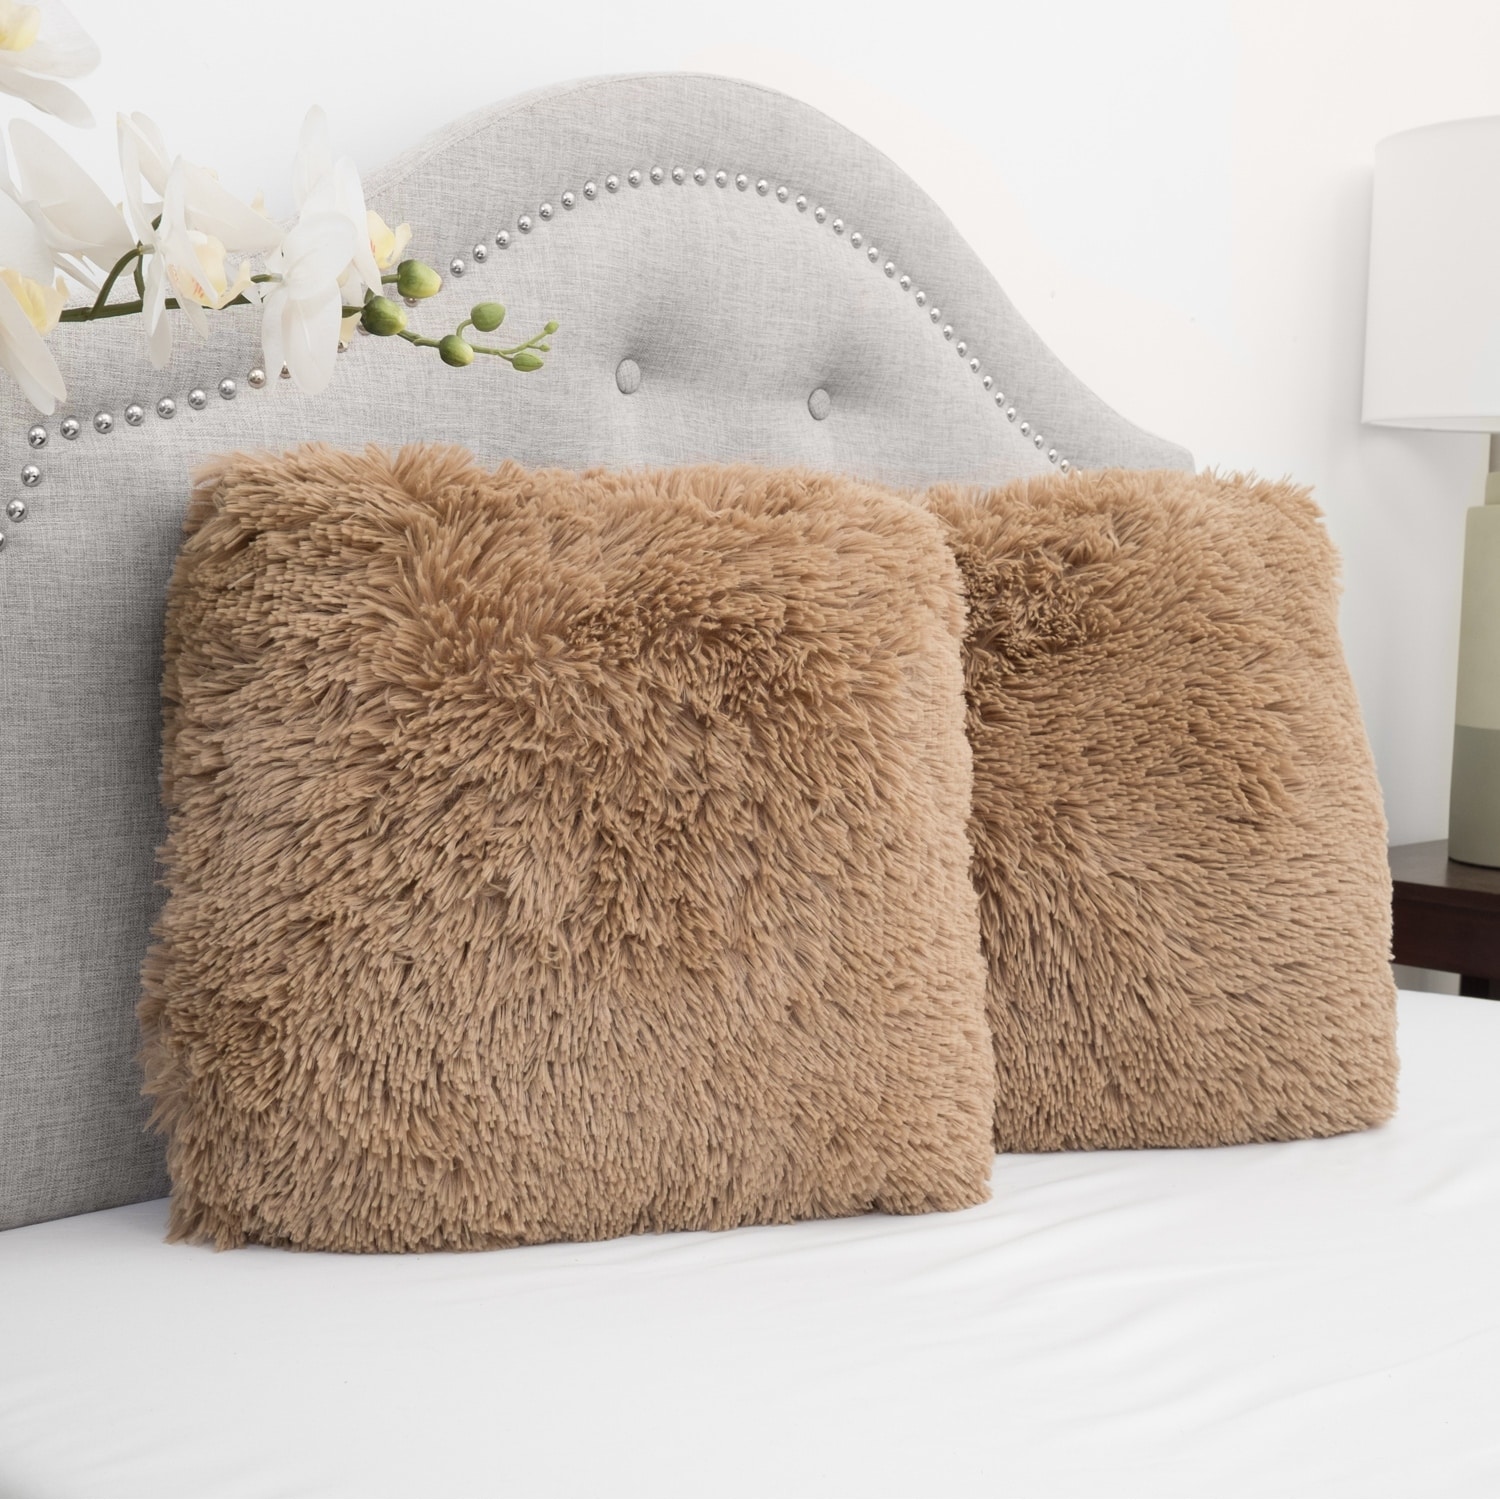 https://ak1.ostkcdn.com/images/products/is/images/direct/52928d0389682645cb0ddbfa6bb2b236c53cb0c1/Colorful-Plush-2-Piece-Throw-Pillows-Set-%28Assorted-Colors%29.jpg